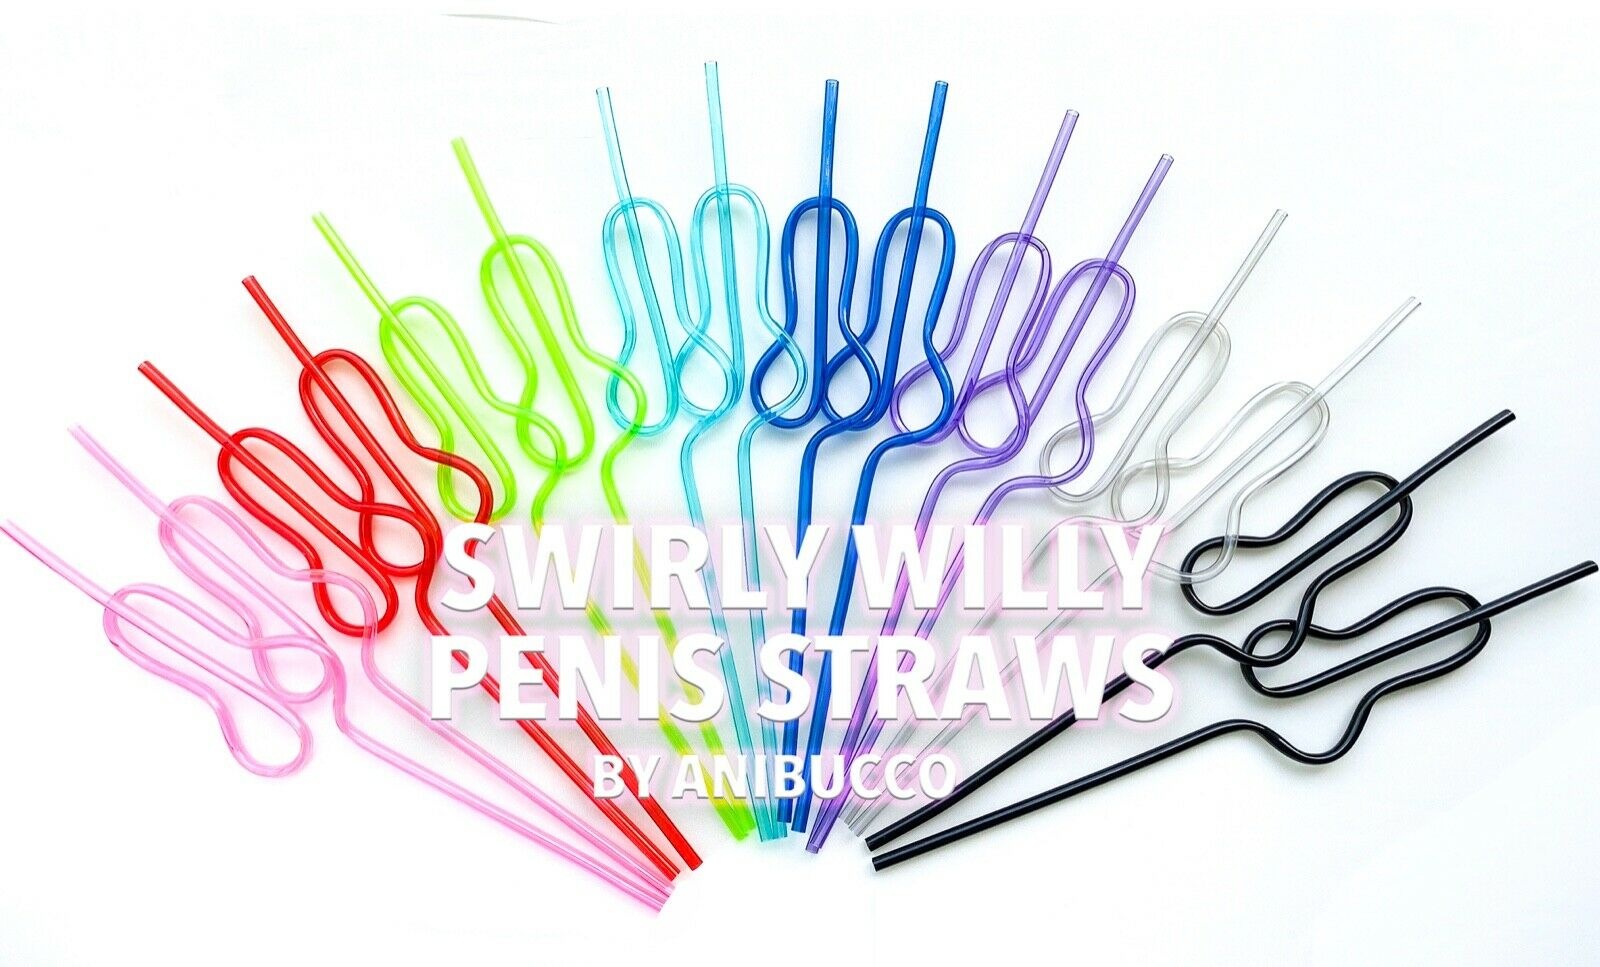 Bachelorette Party Penis Dick Drinking Straws Supplies Decorations Favors Swirly